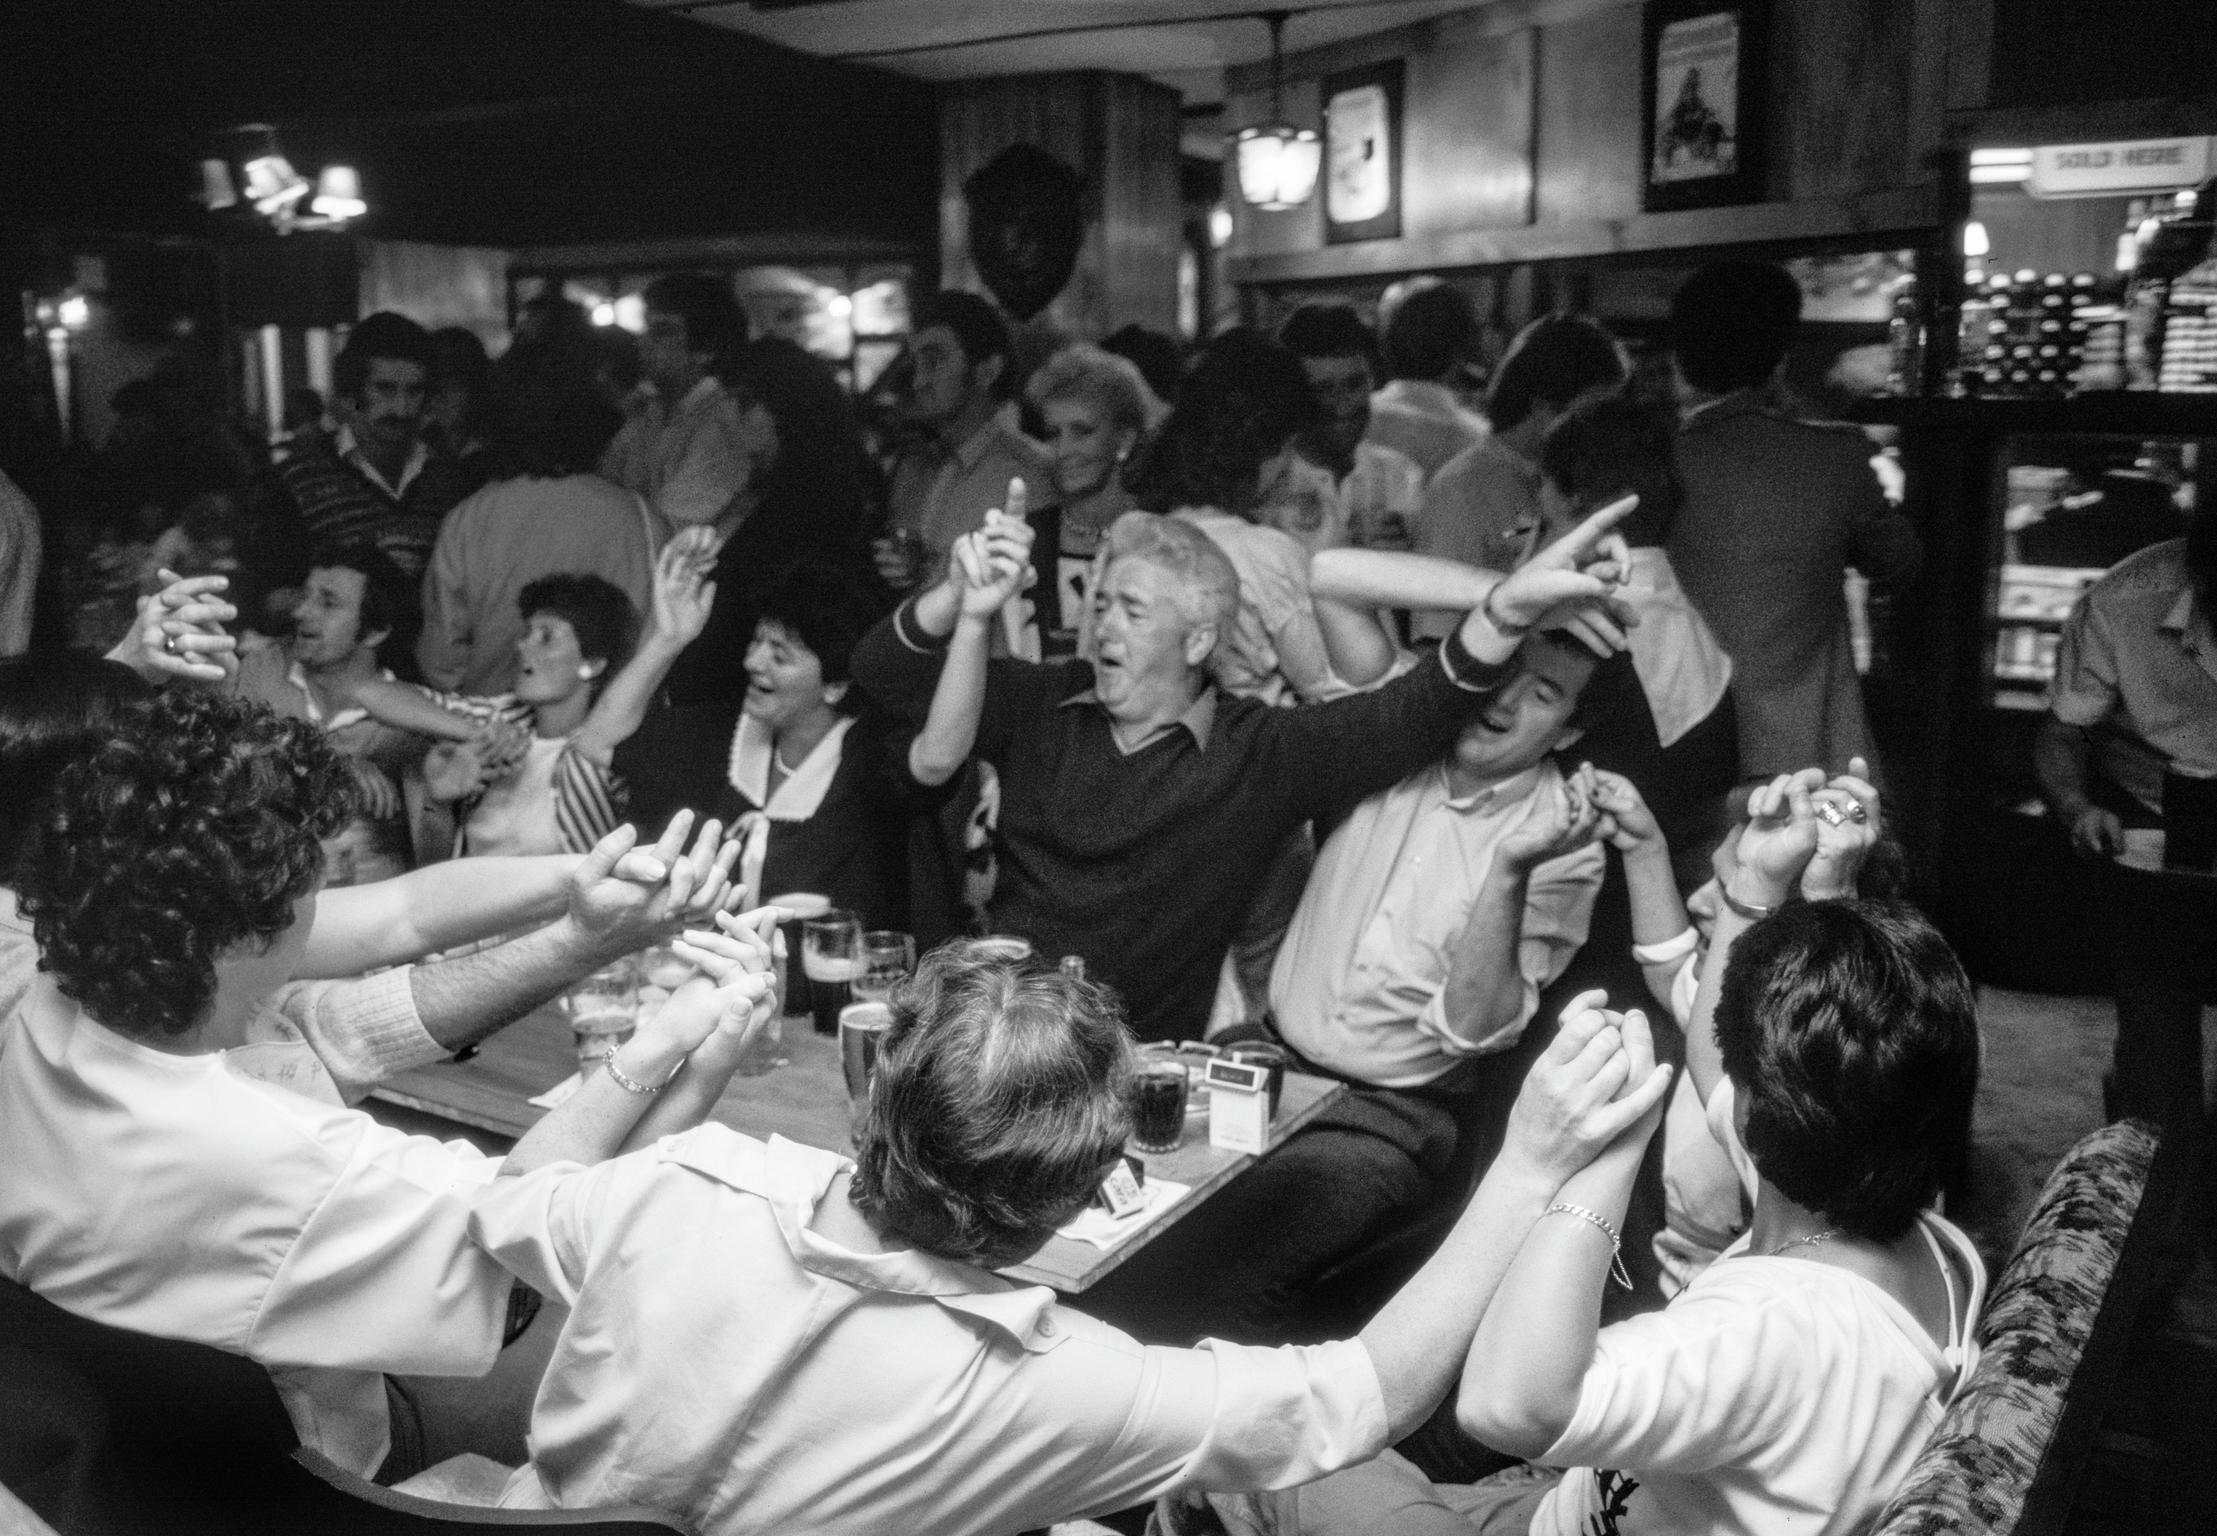 The Laurel Singing Bar. Every night 300 people crowd in to sing together in an evening of self fun. Killarney. Ireland